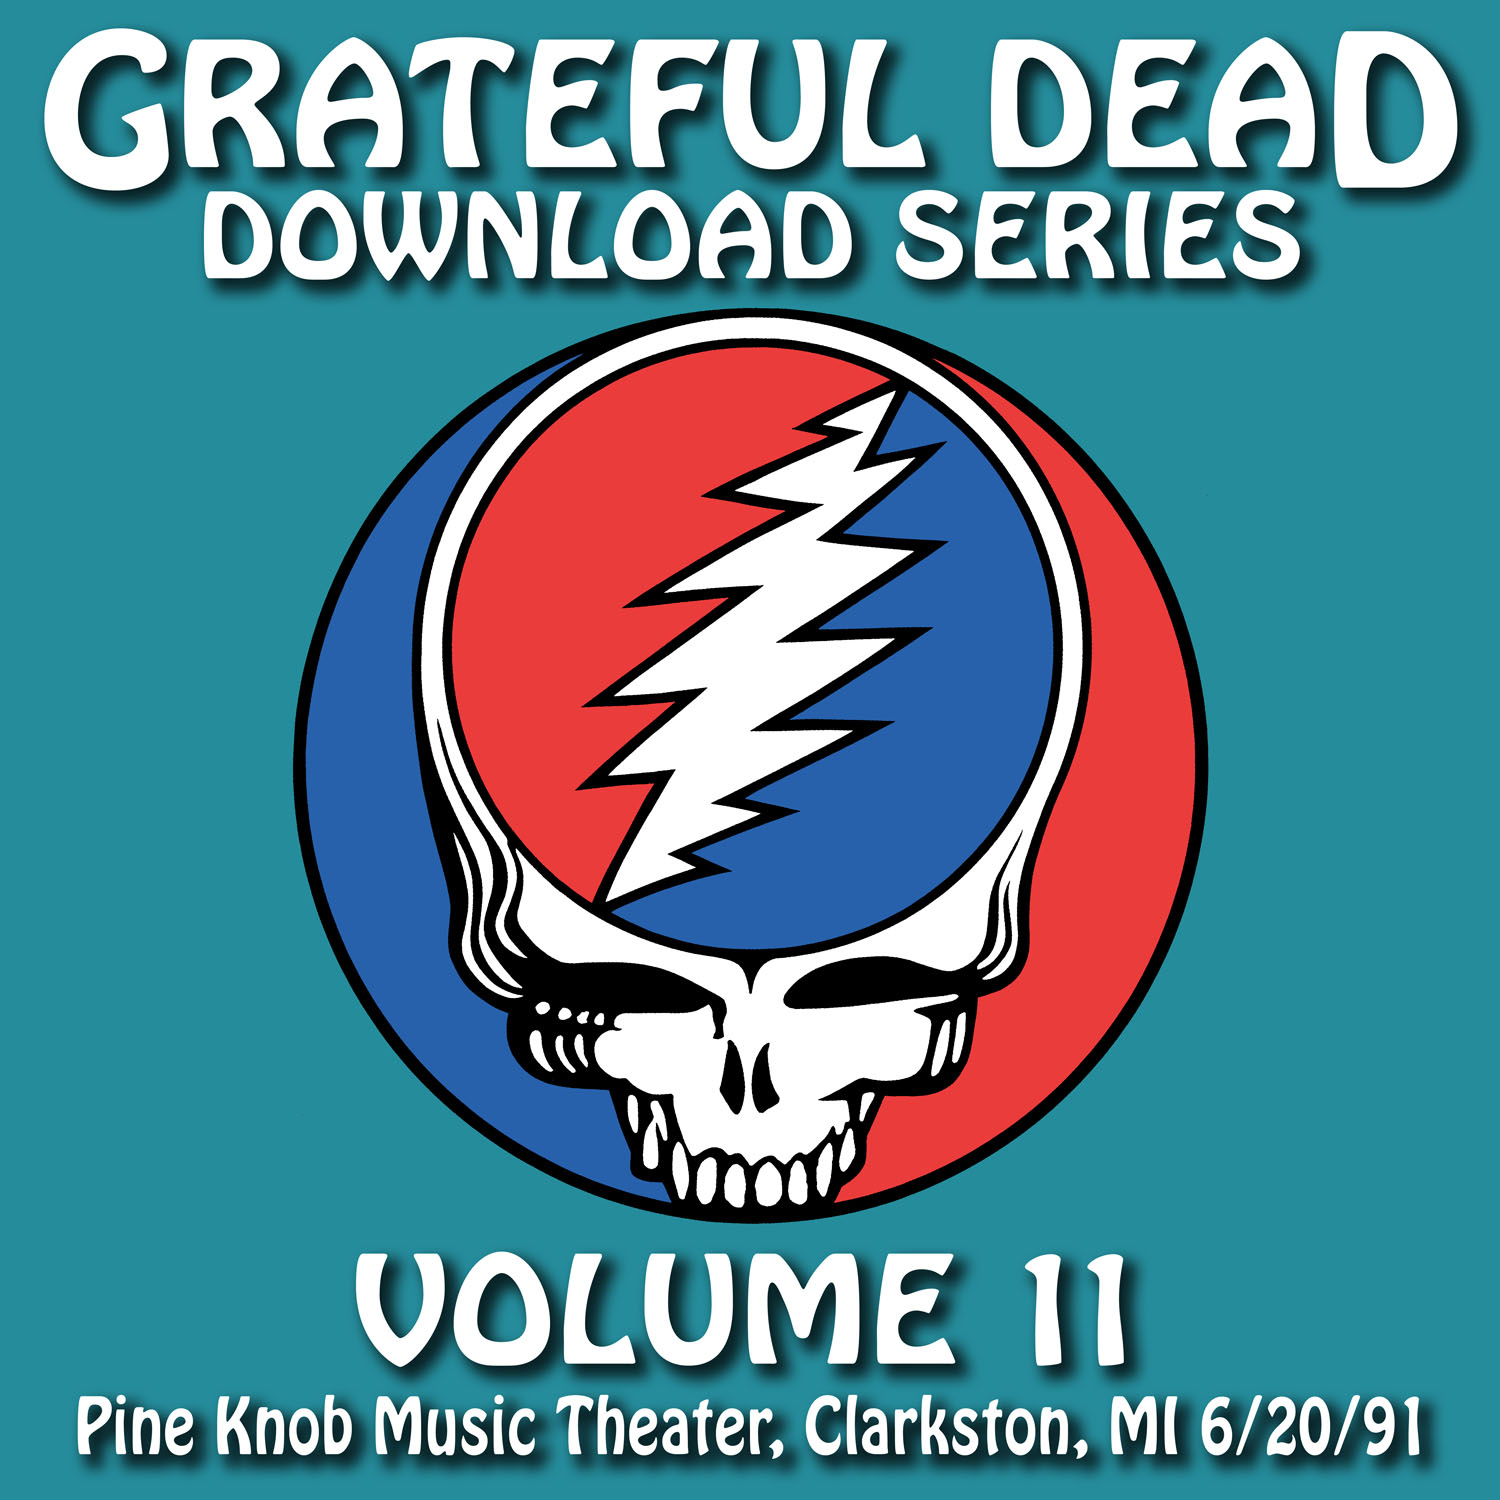 He's Gone (Live at Pine Knob Music Theater, Clarkston, MI, June 20, 1991)